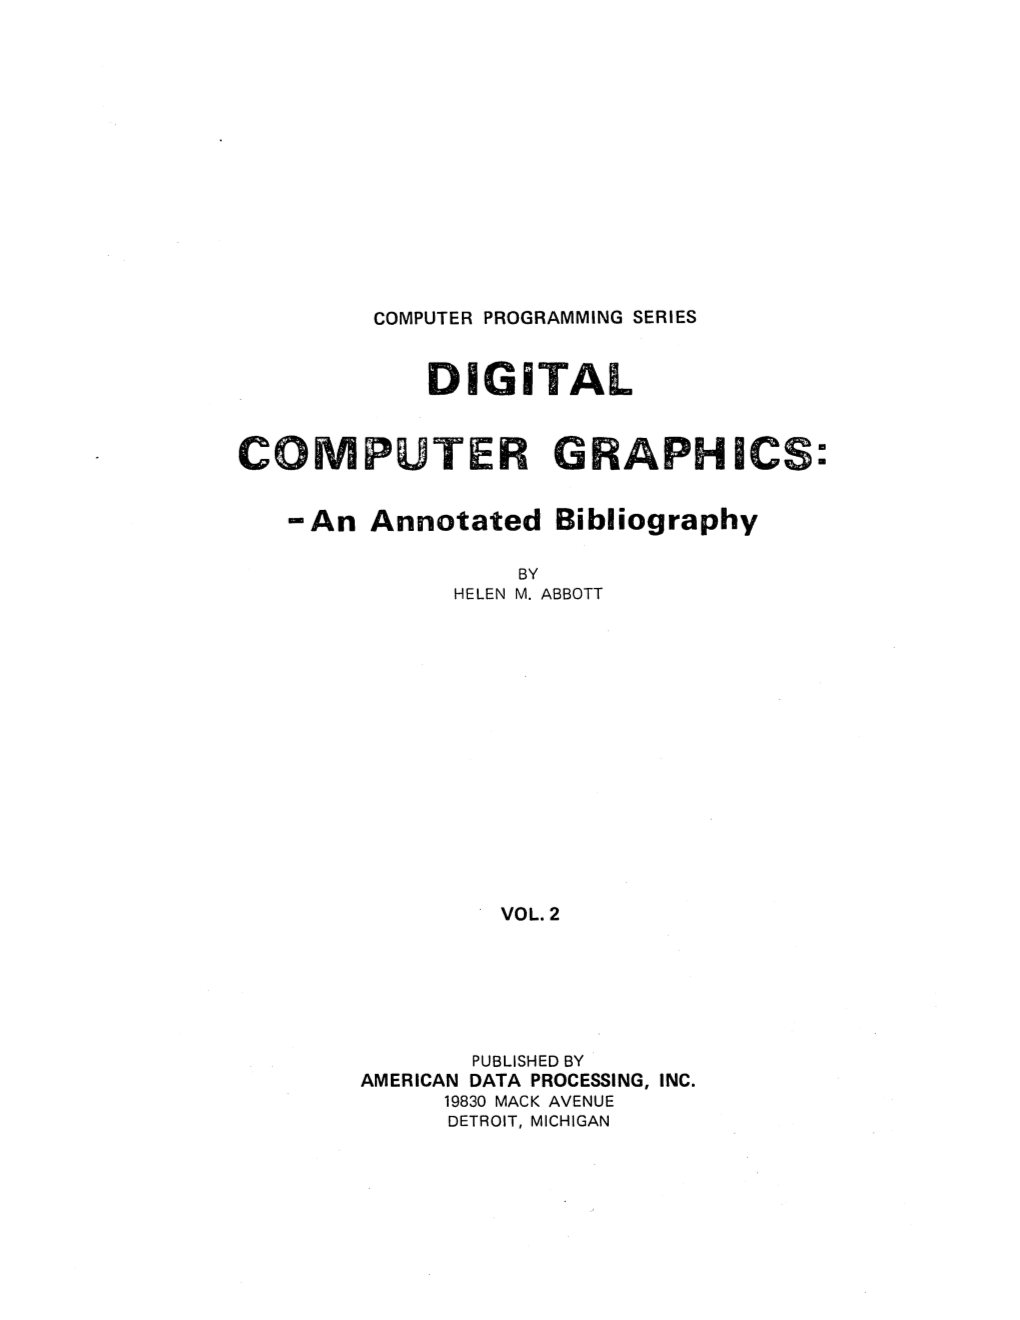 DIGITAL COMPUTER GRAPHICS: - an Annotated Bibliography